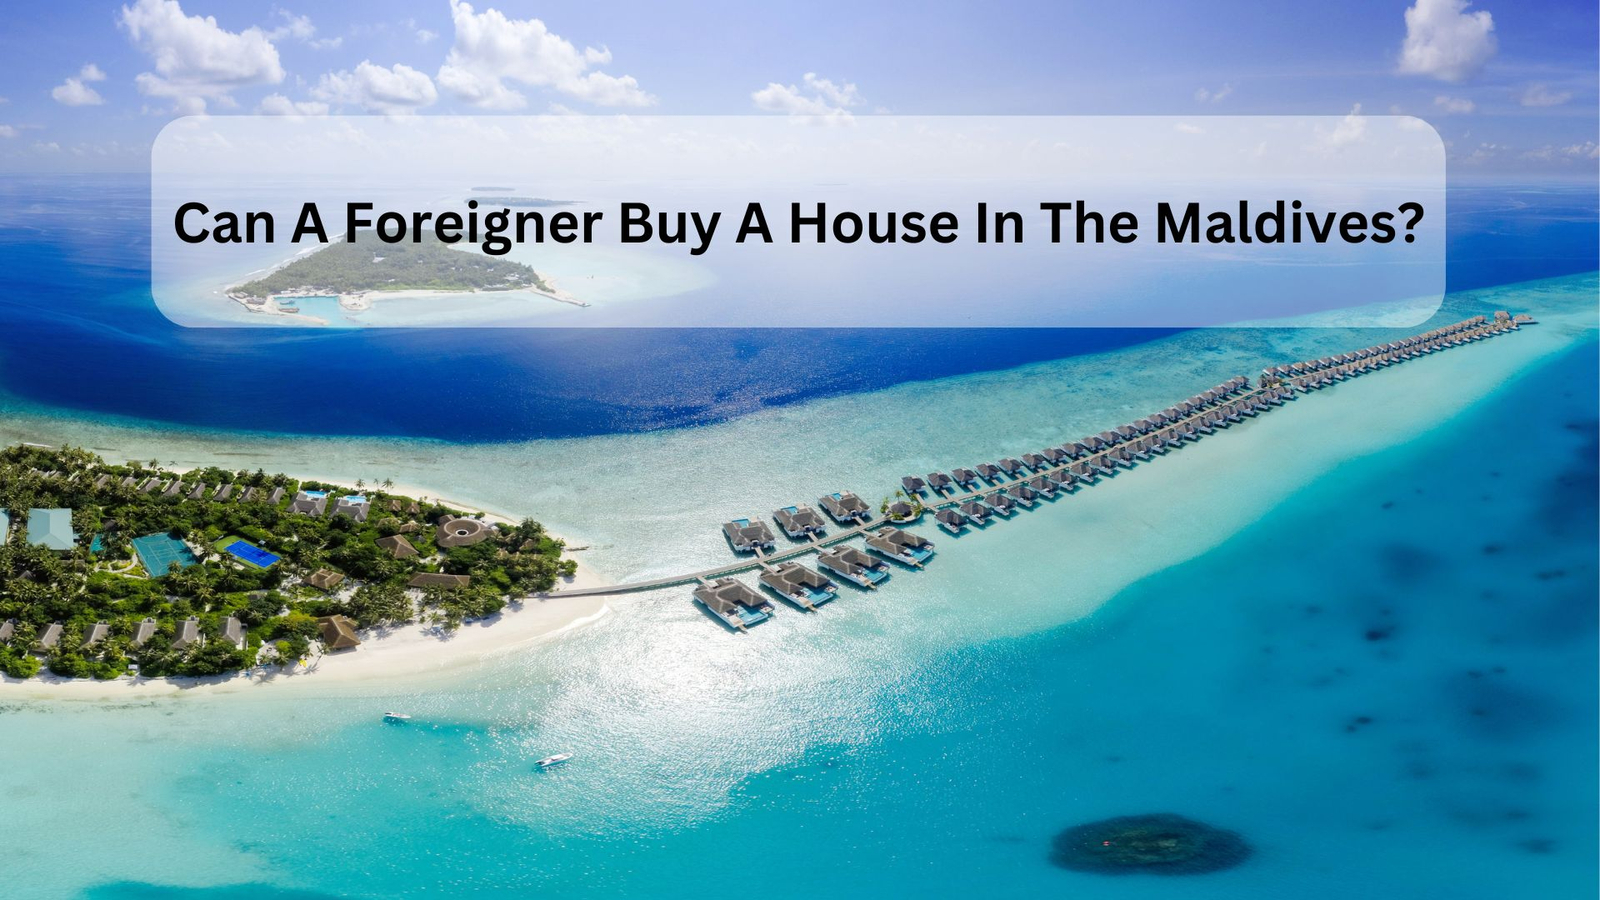 Can A Foreigner Buy A House In The Maldives?